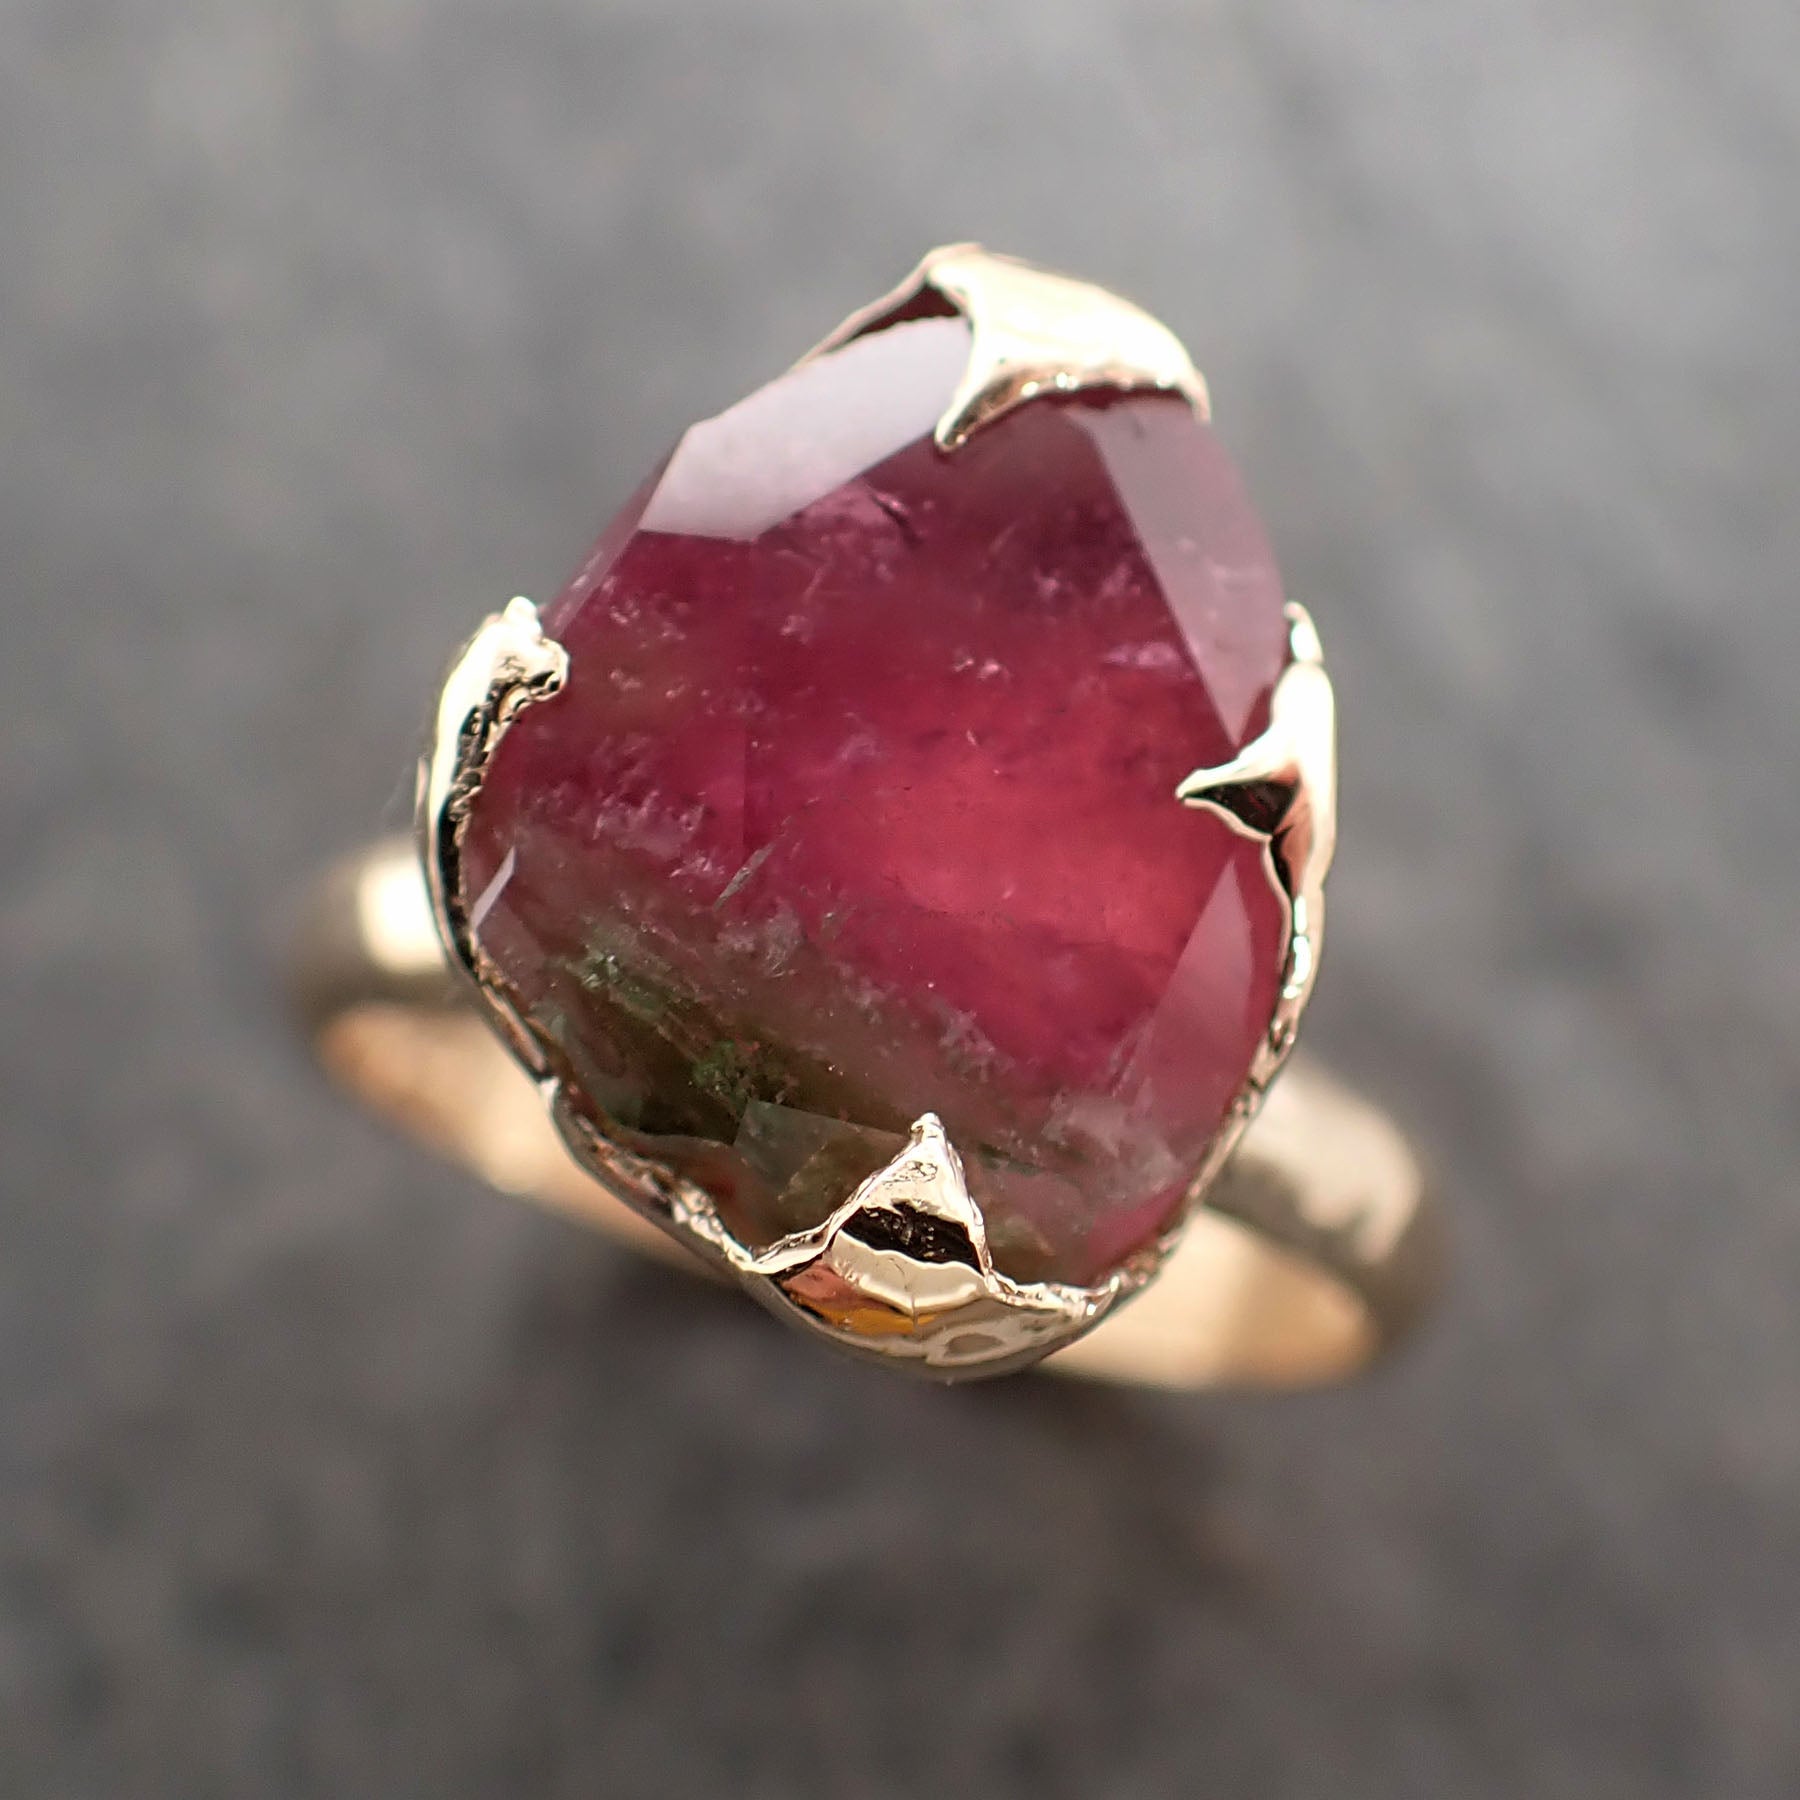 Partially faceted Watermelon Tourmaline Solitaire 14k Gold Engagement Ring One Of a Kind Gemstone Ring byAngeline 2382